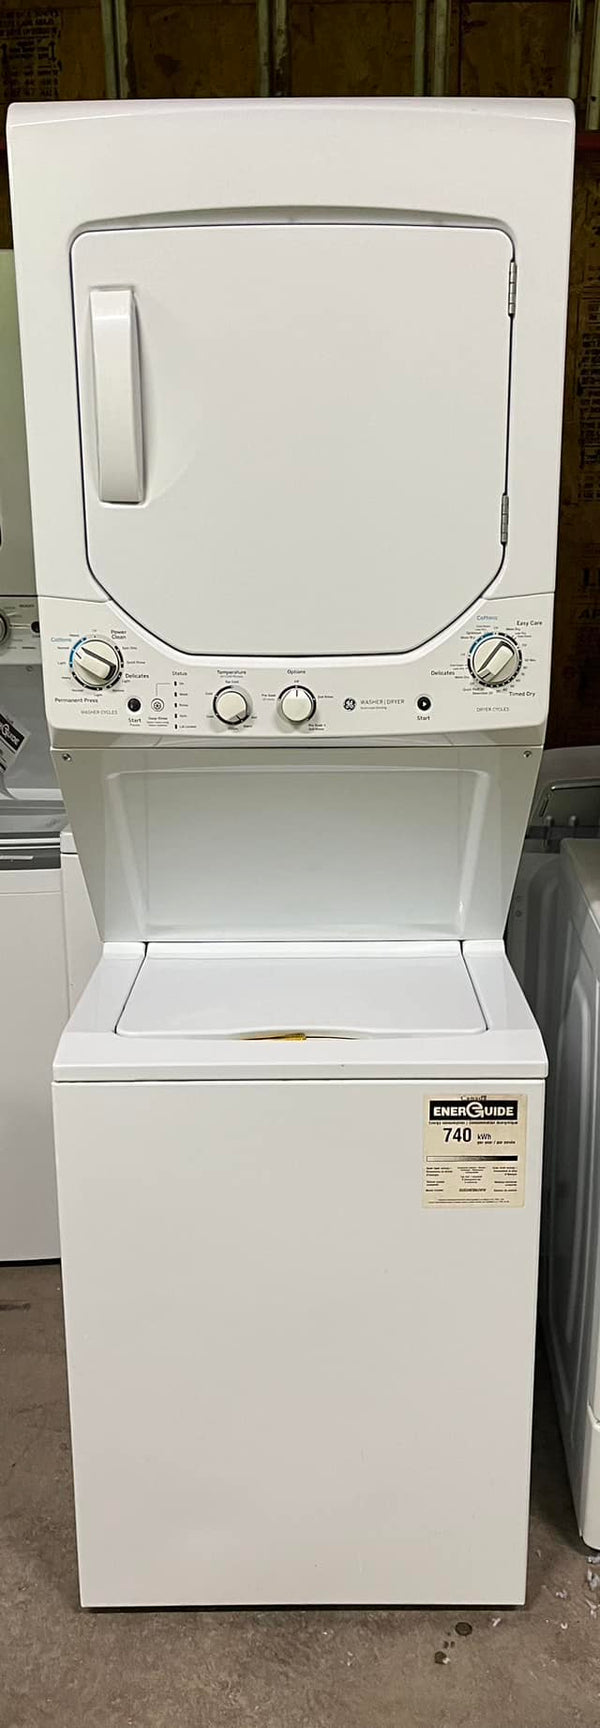 Used GE 24" Apartment Sized Gas Laundry Center CB1